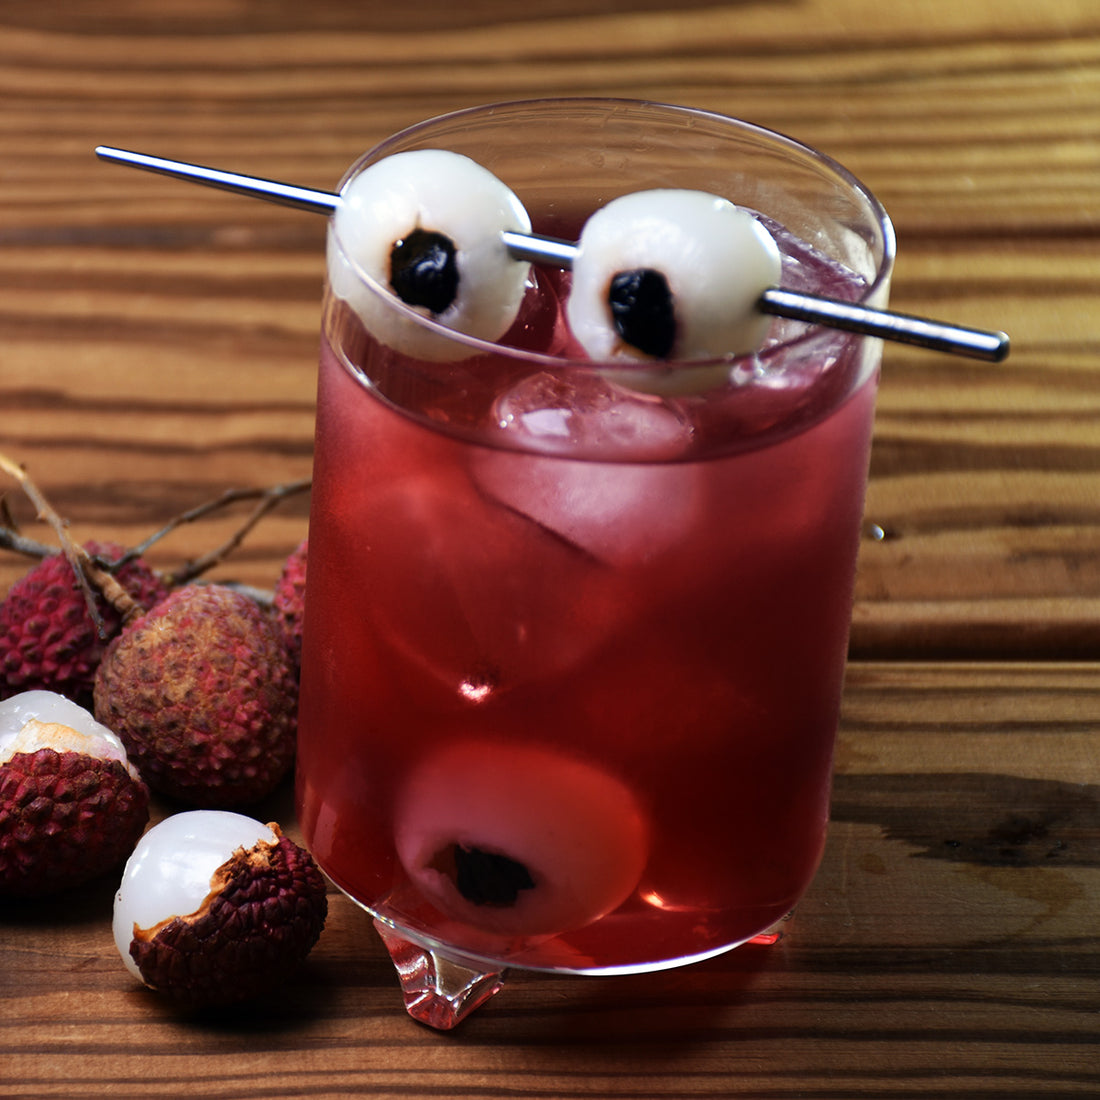 Lychee Cocktails - Lychee Eyeball Cocktail